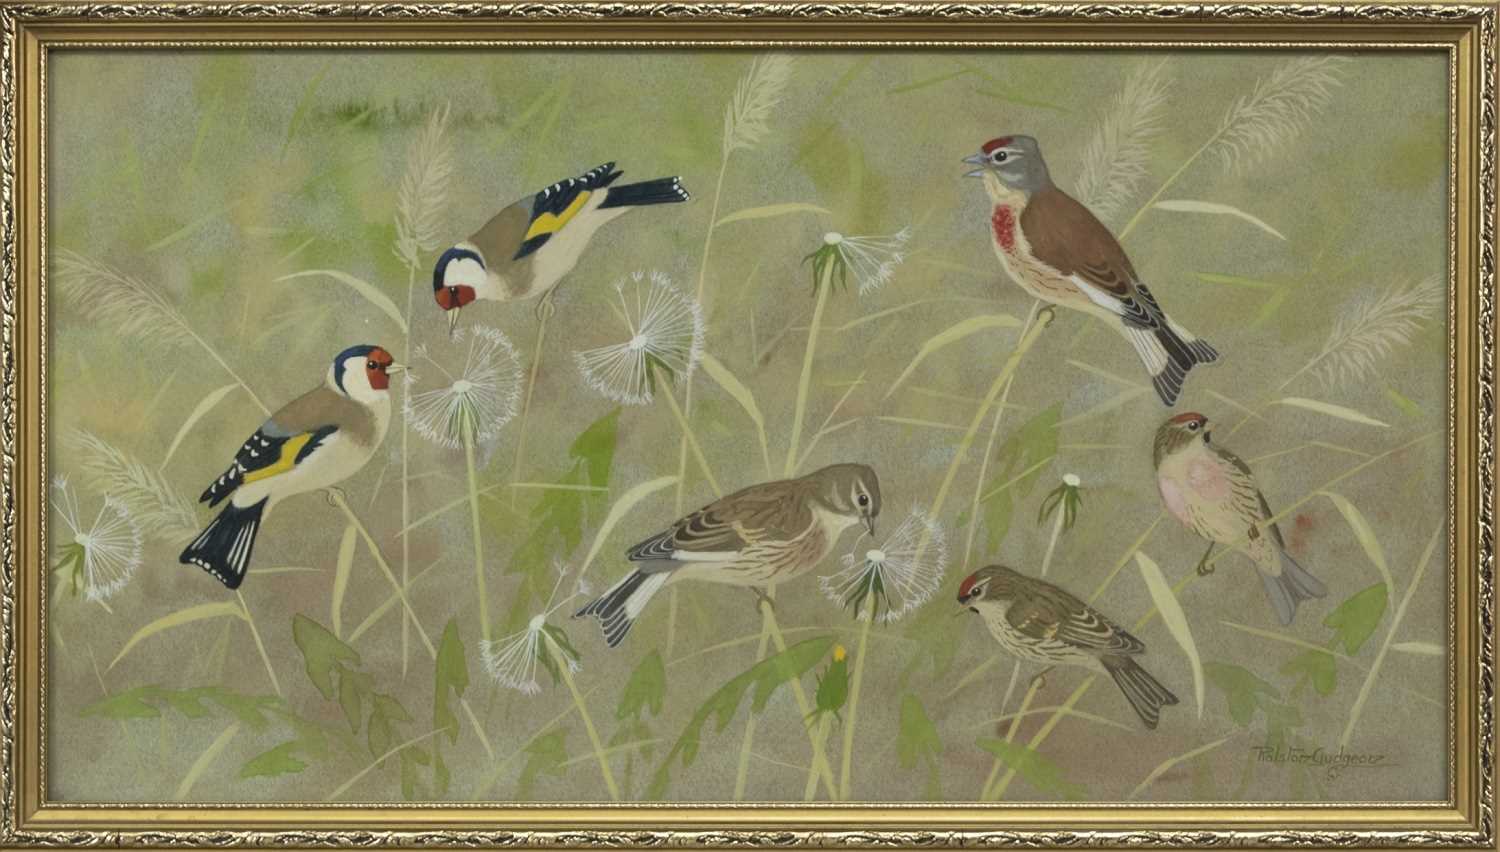 Lot 37 - PERCHED BIRDS, A WATERCOLOUR BY RALSTON GUDGEON